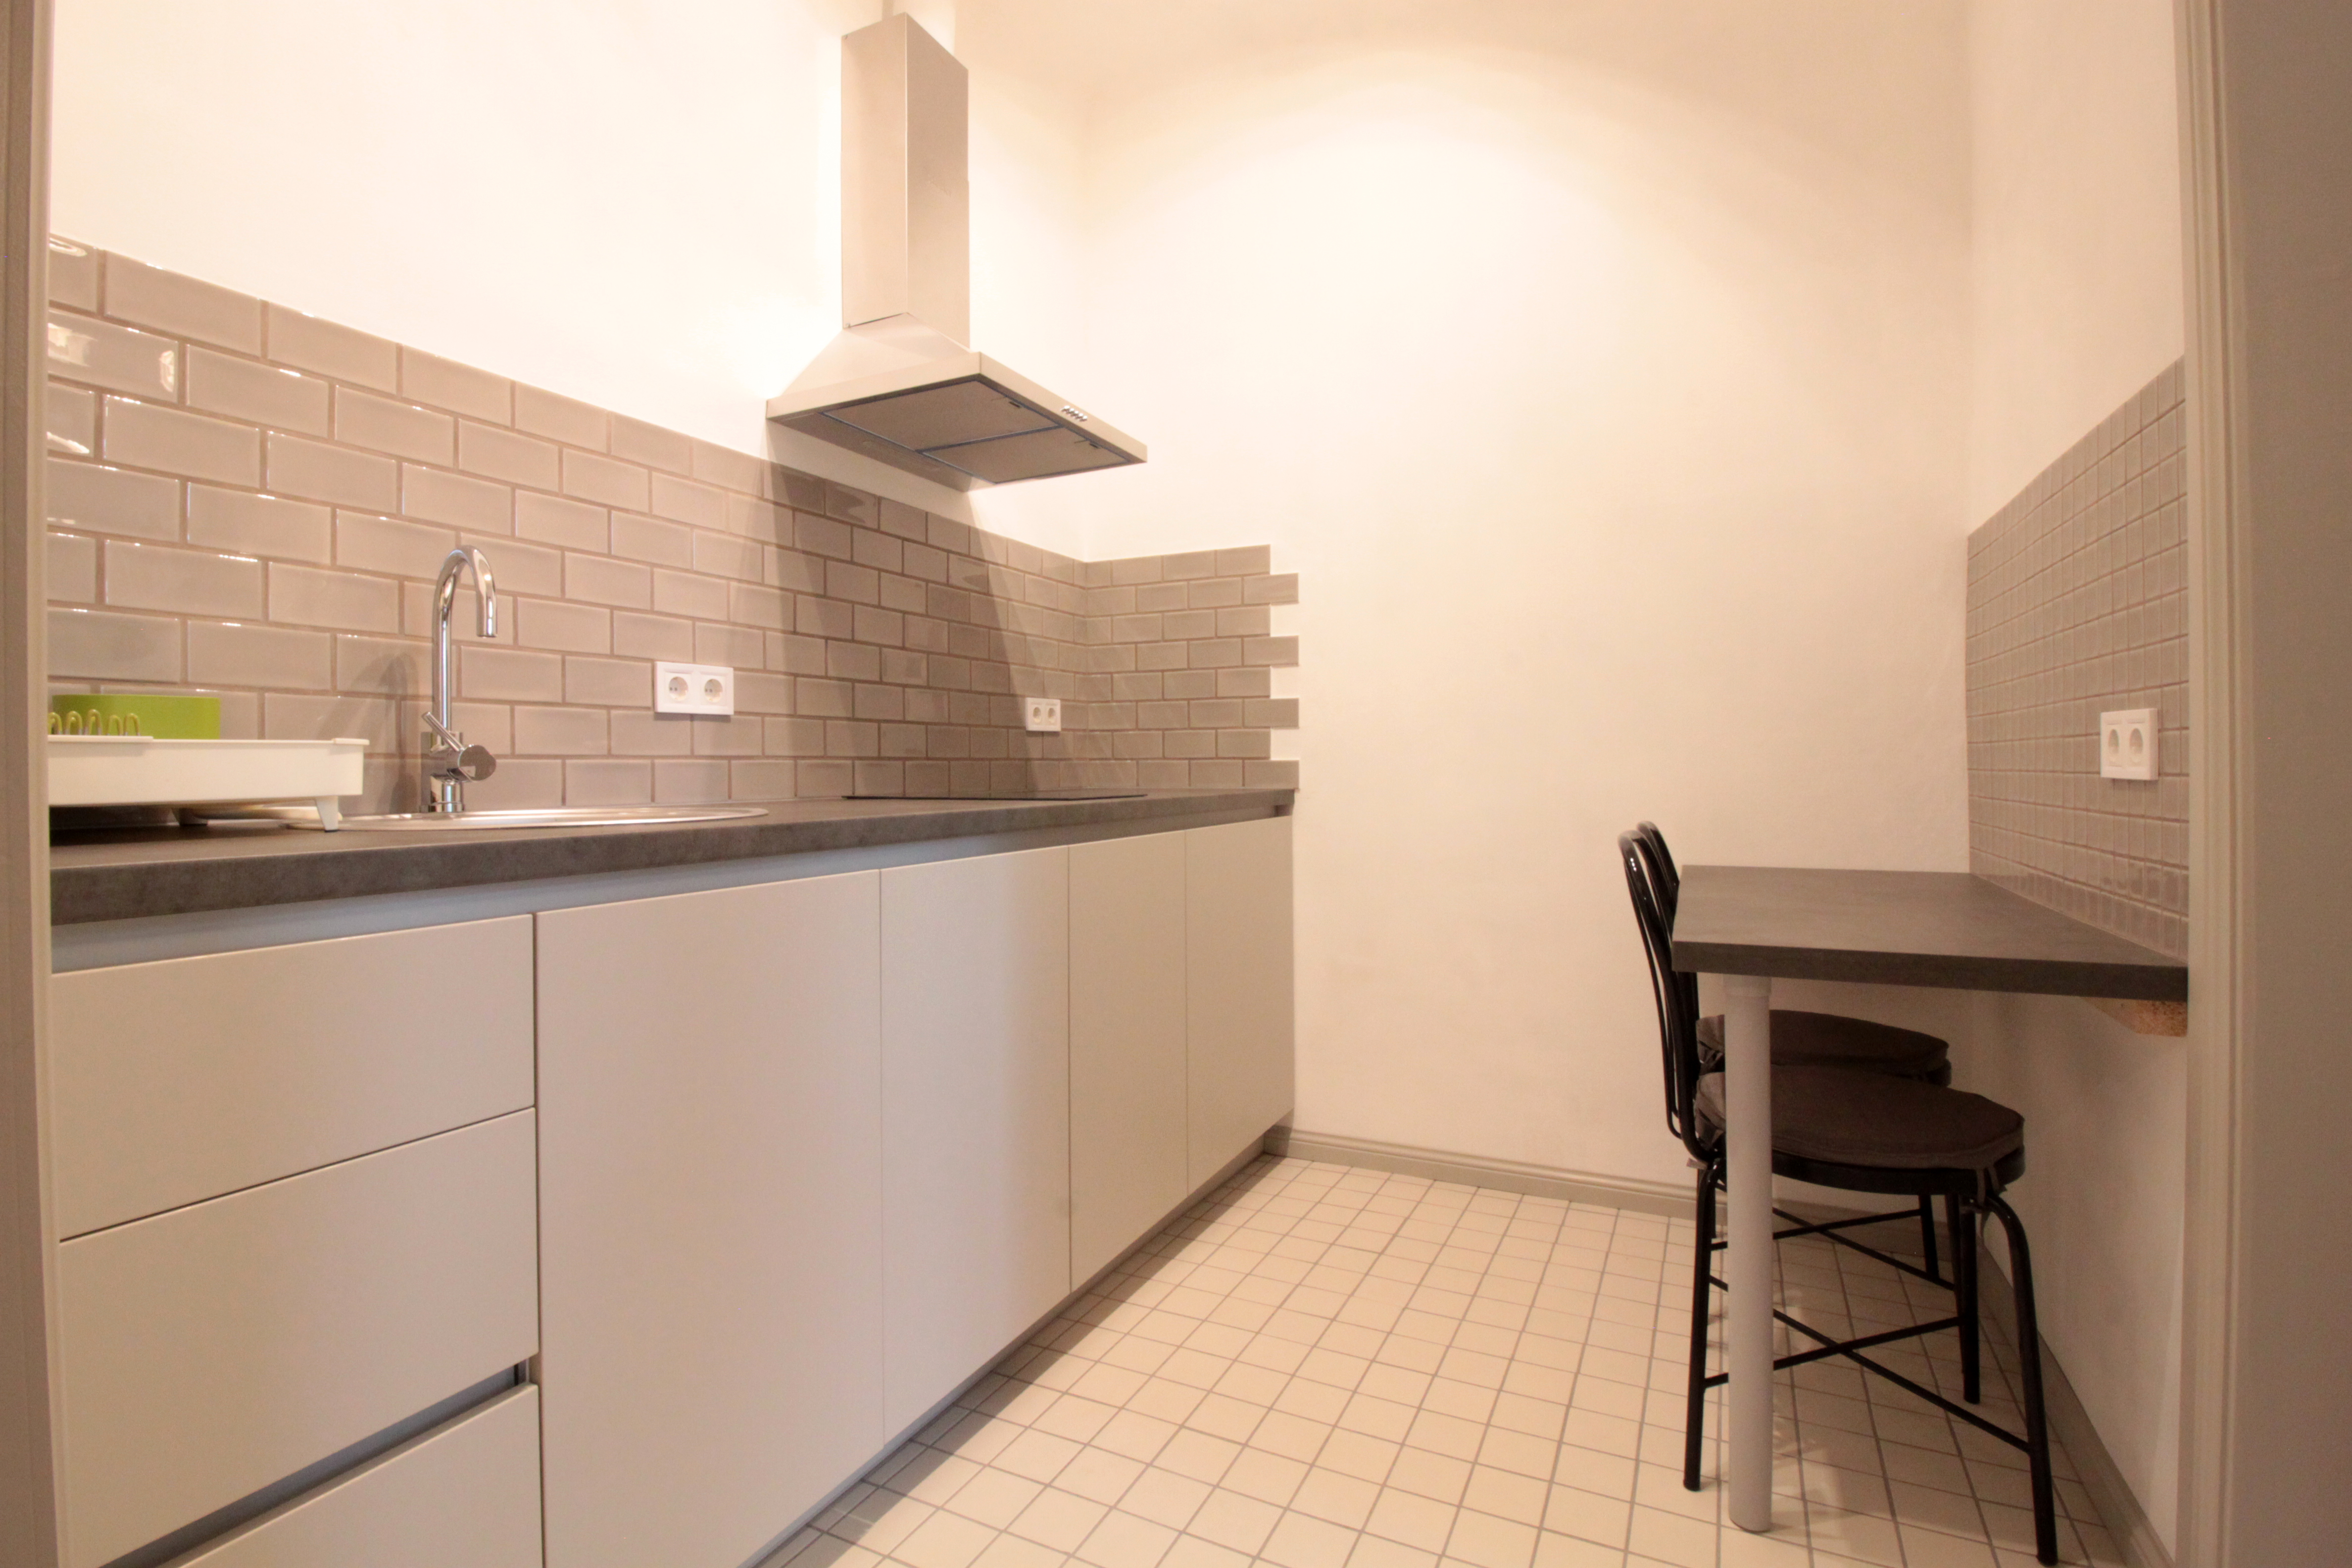 Apartment for rent, Miera street 16 - Image 1